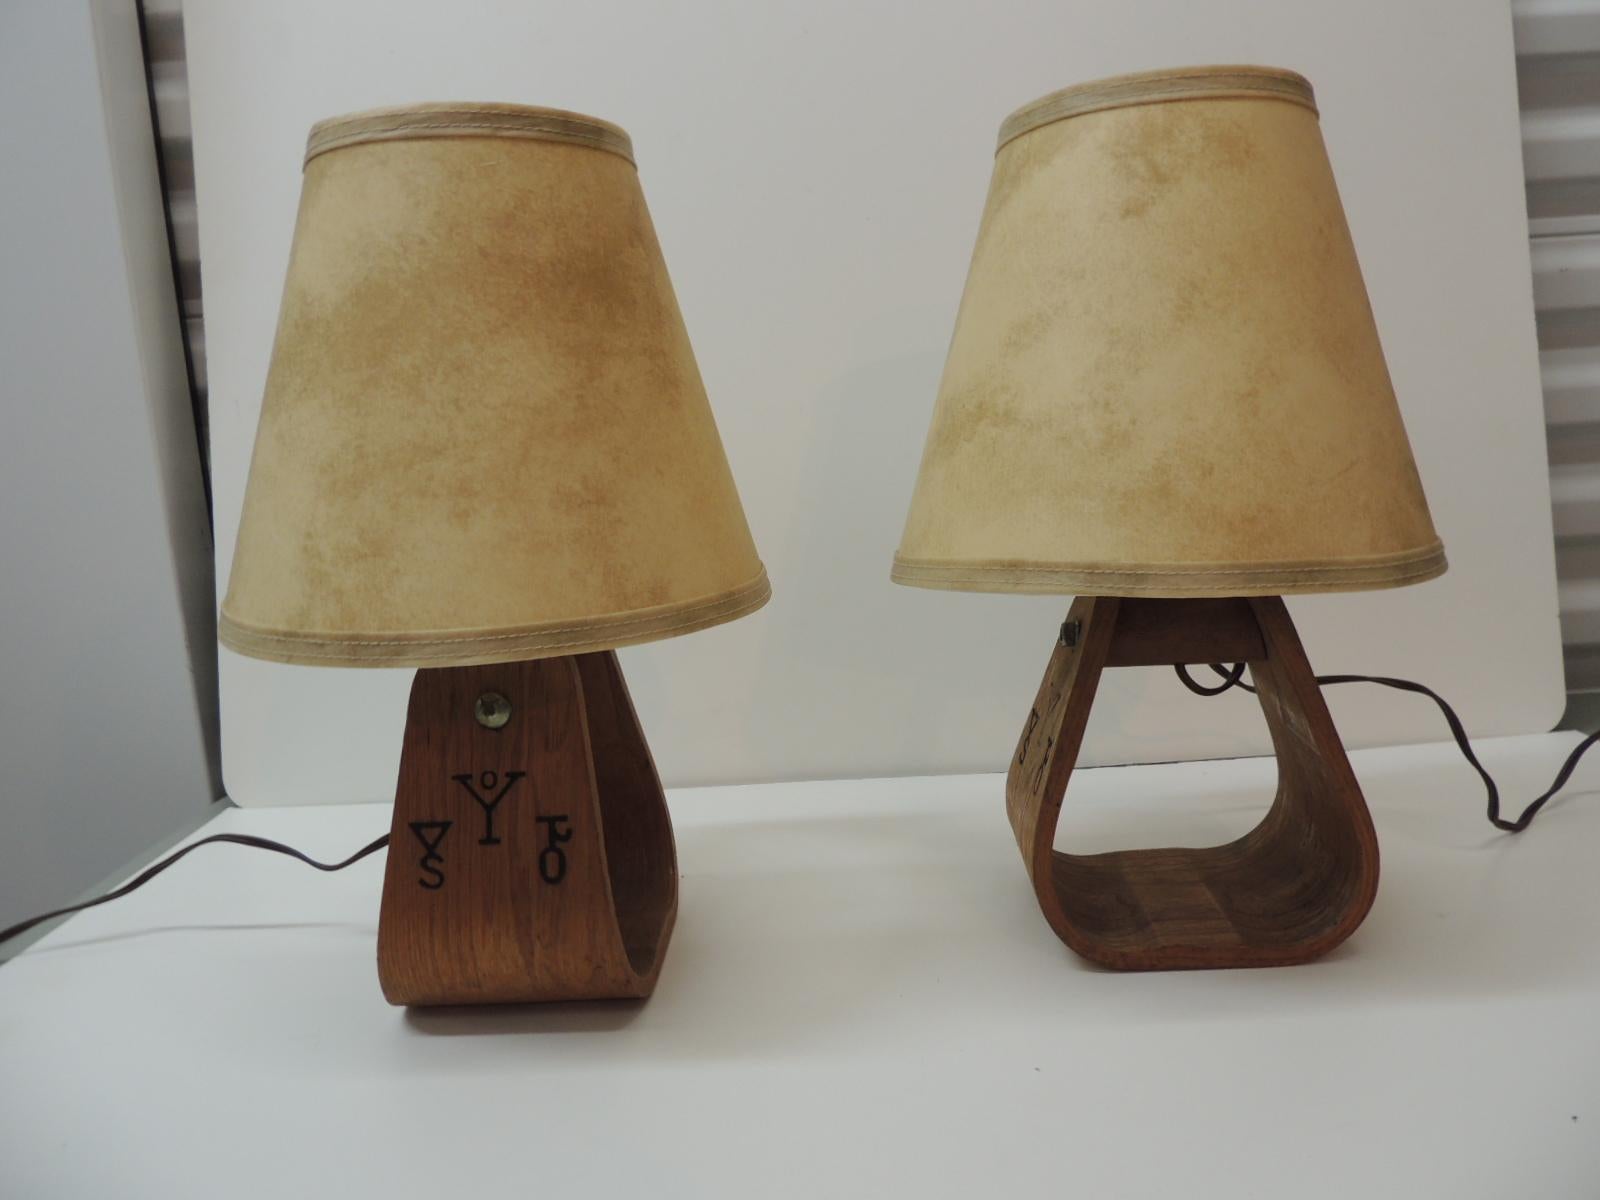 Vintage pair of wood horse Stirrup Petite table lamps with faux parchement style clip-on shades.
Size: 15H to shade
Base: 6 W x 4.5” x 12 to top of bulb
Shades: 8 x 9 H.